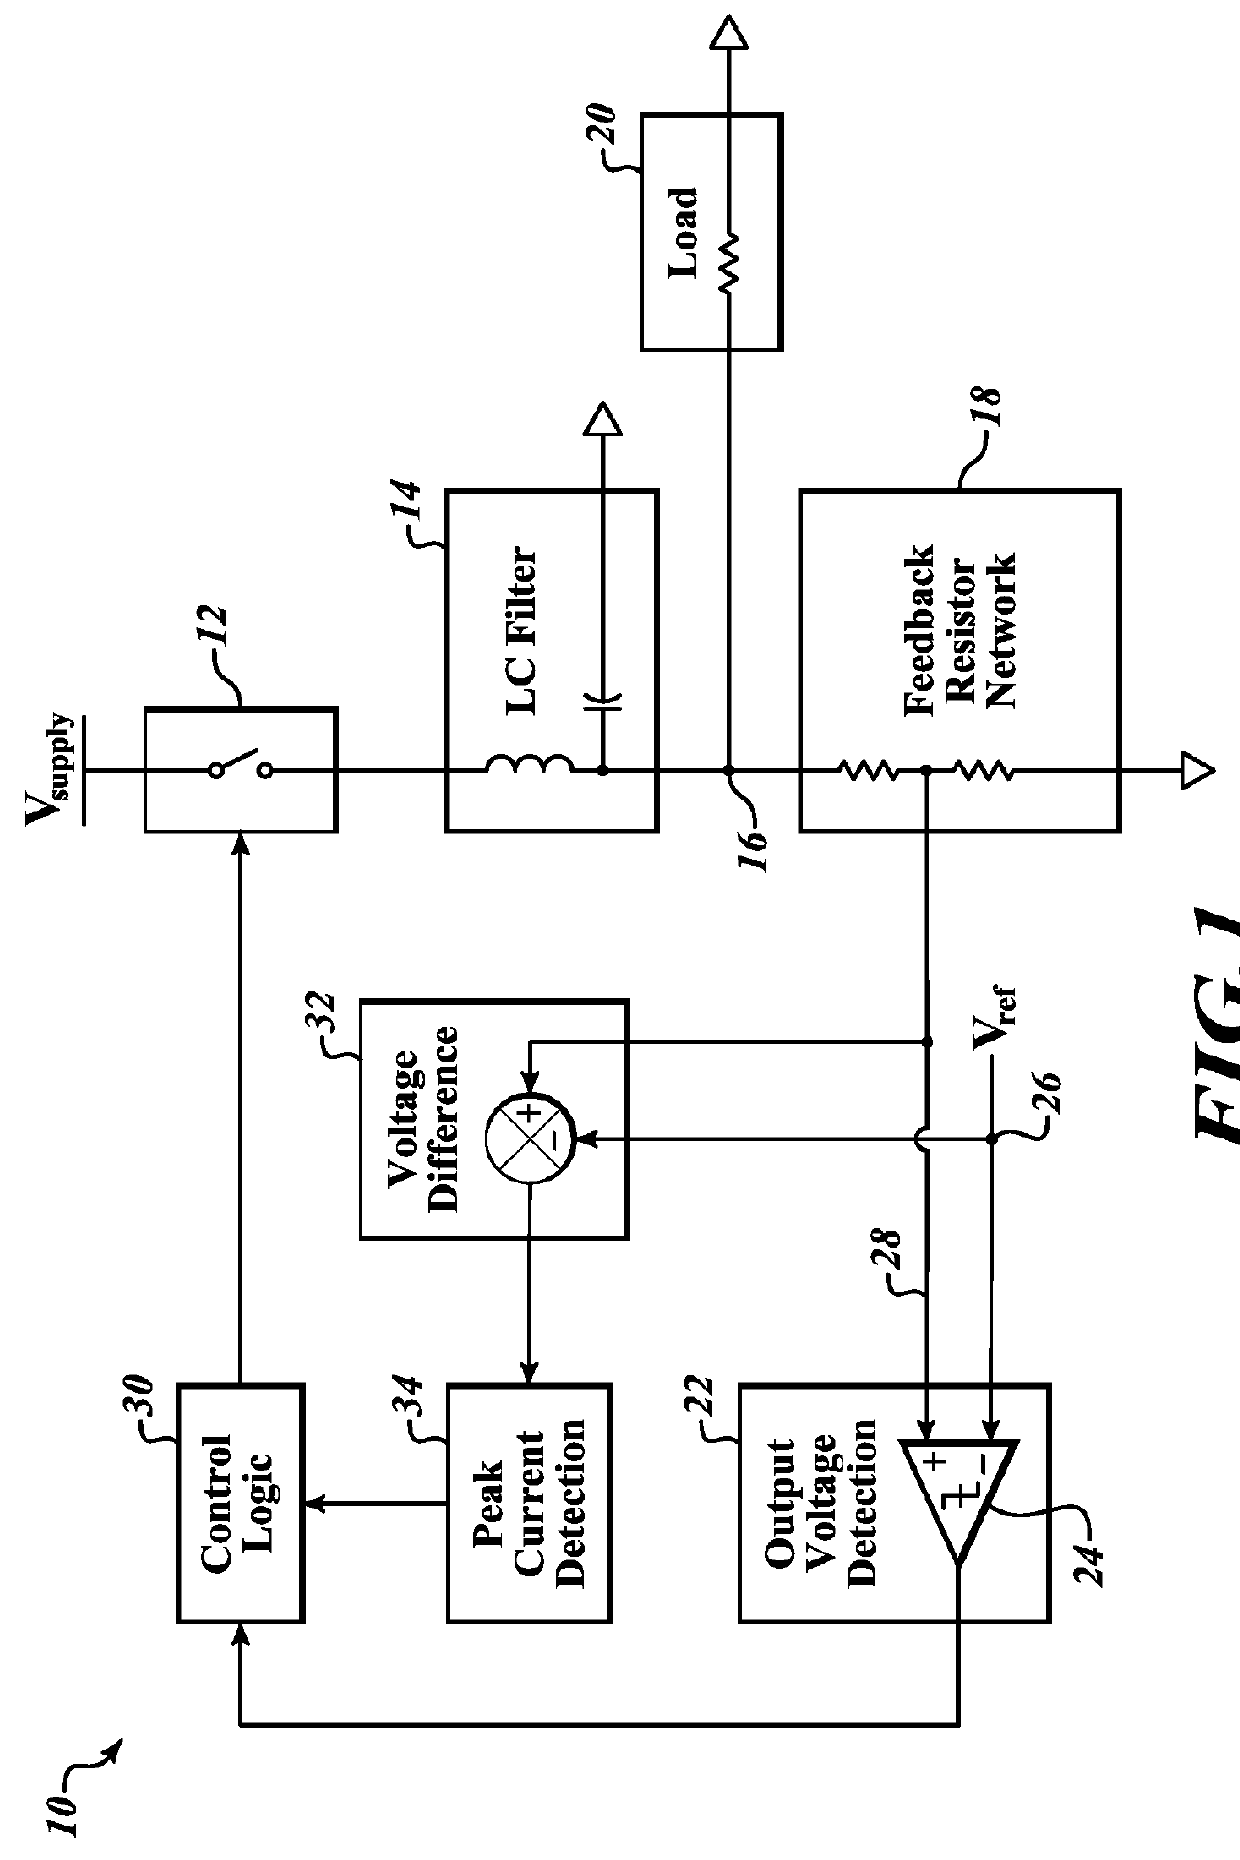 Frequency detection to perform dynamic peak current control